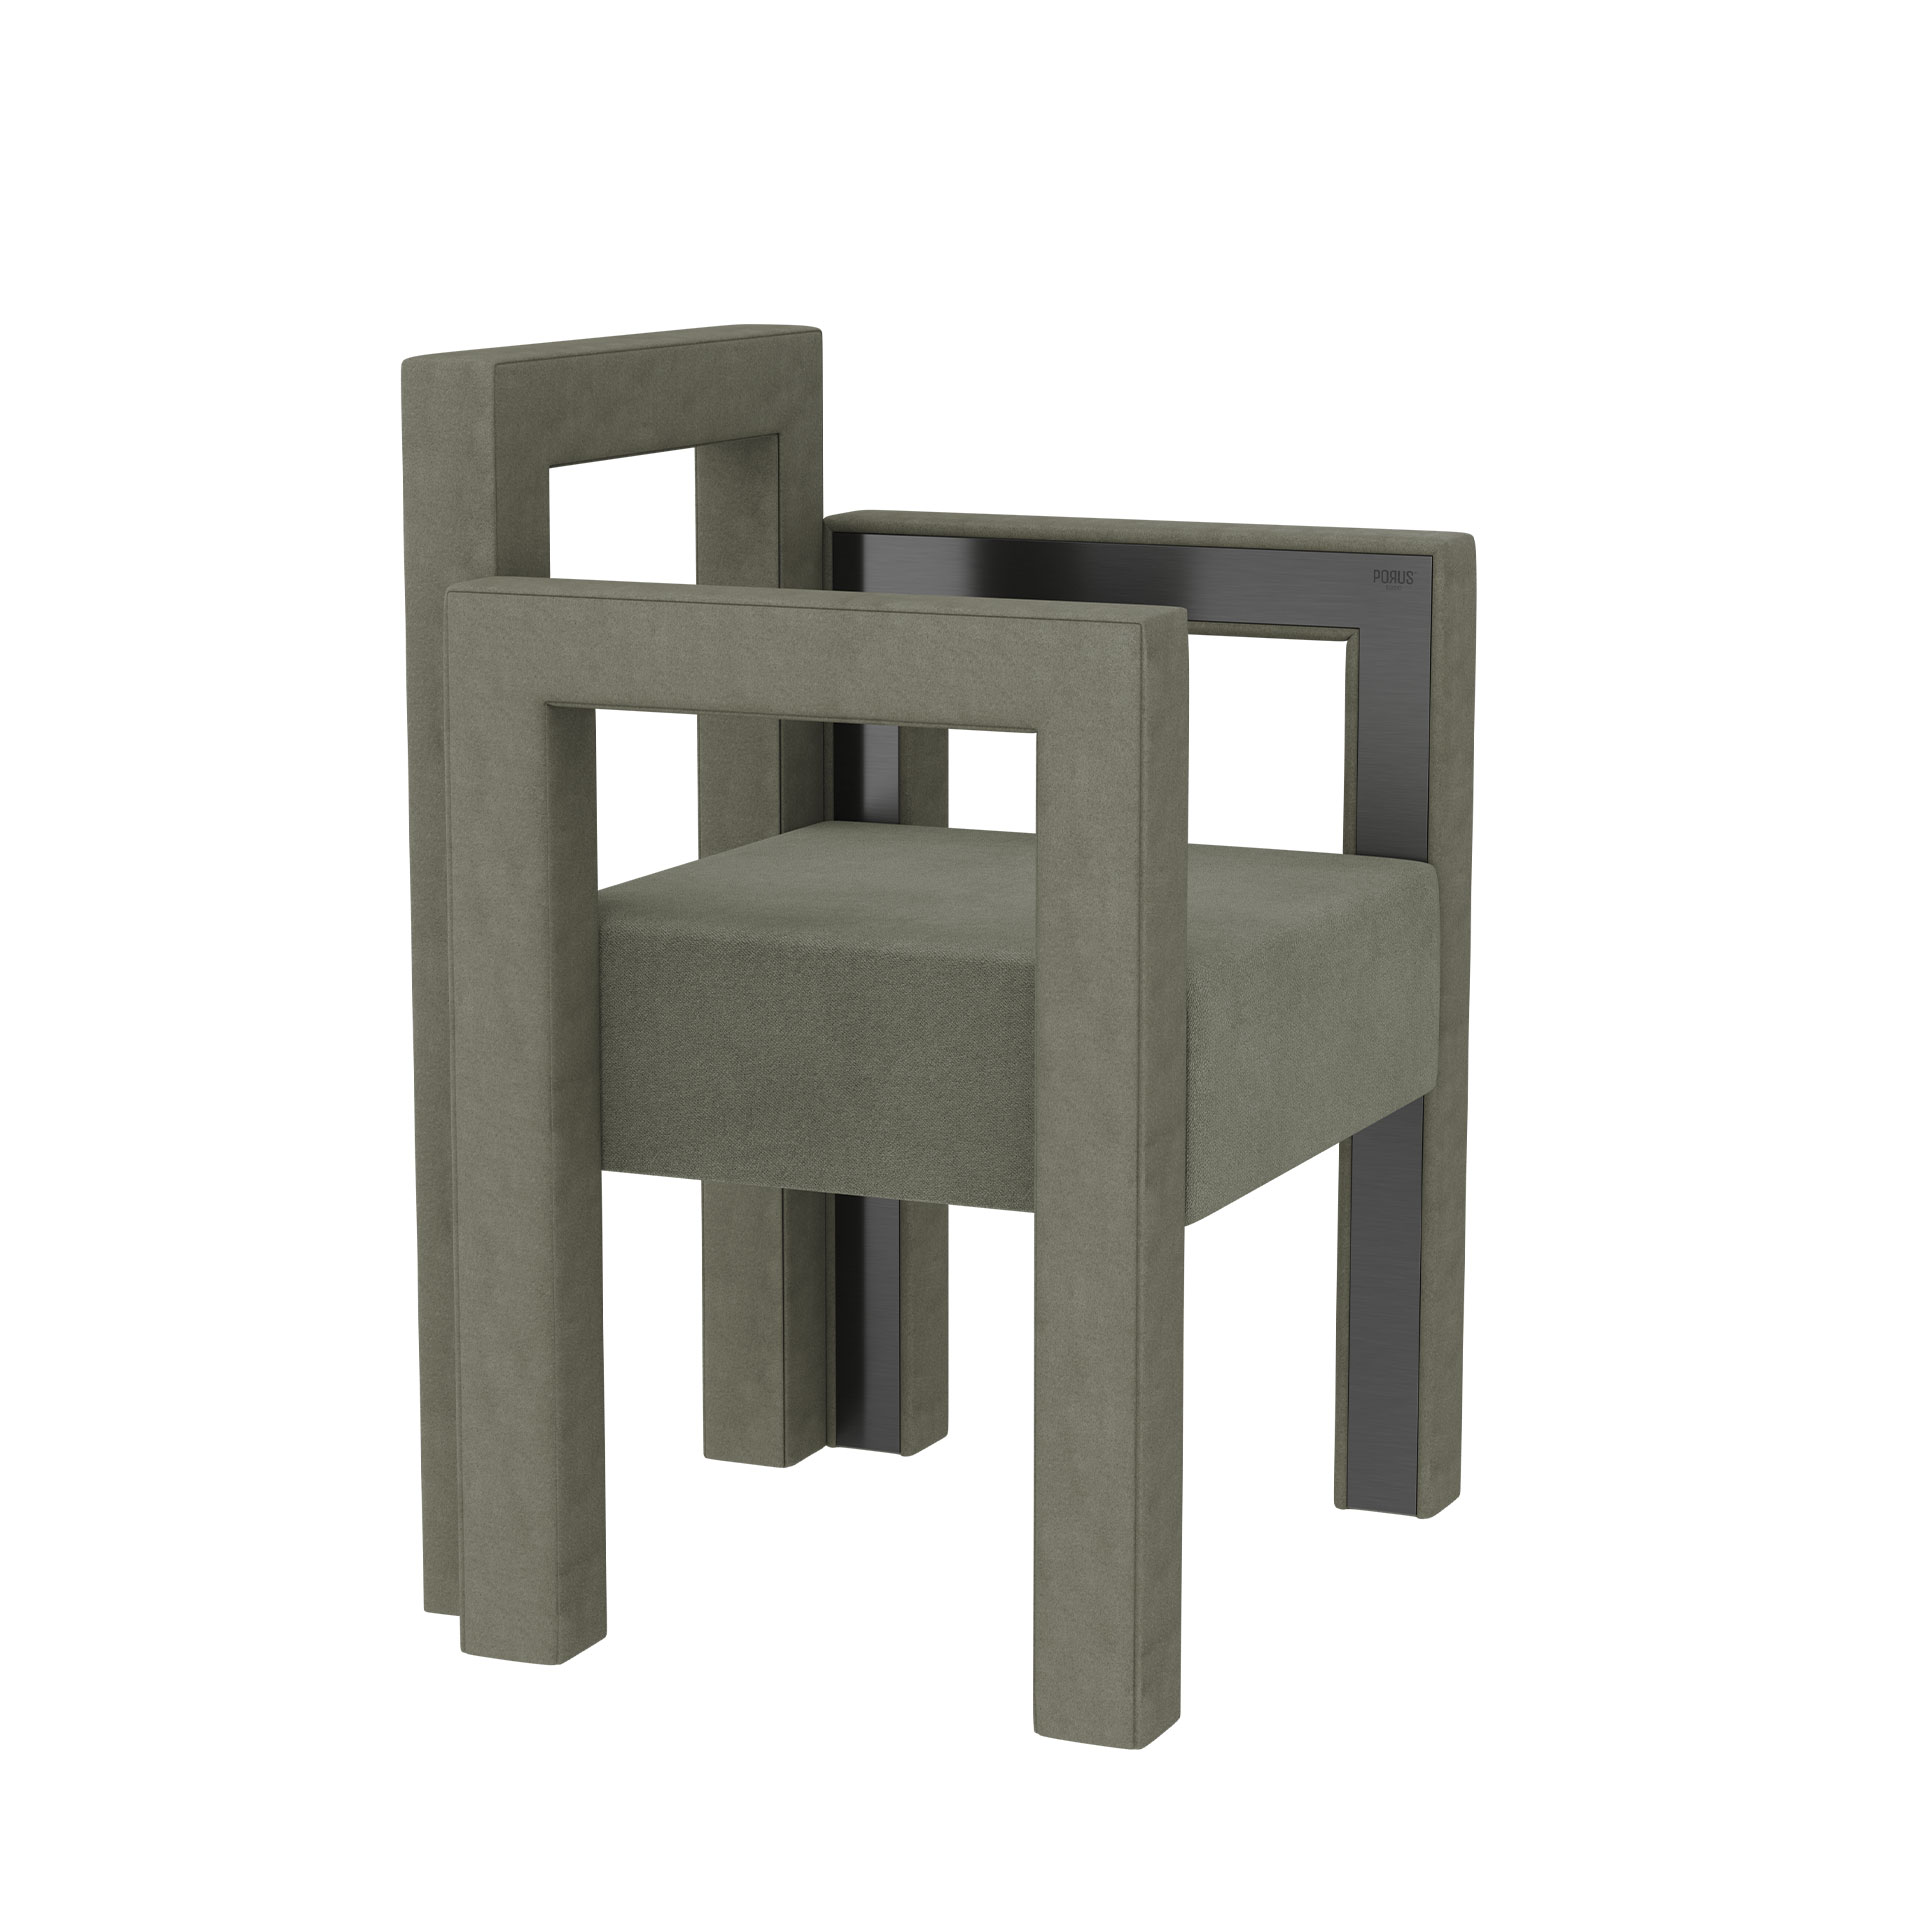 Mirage dining chair